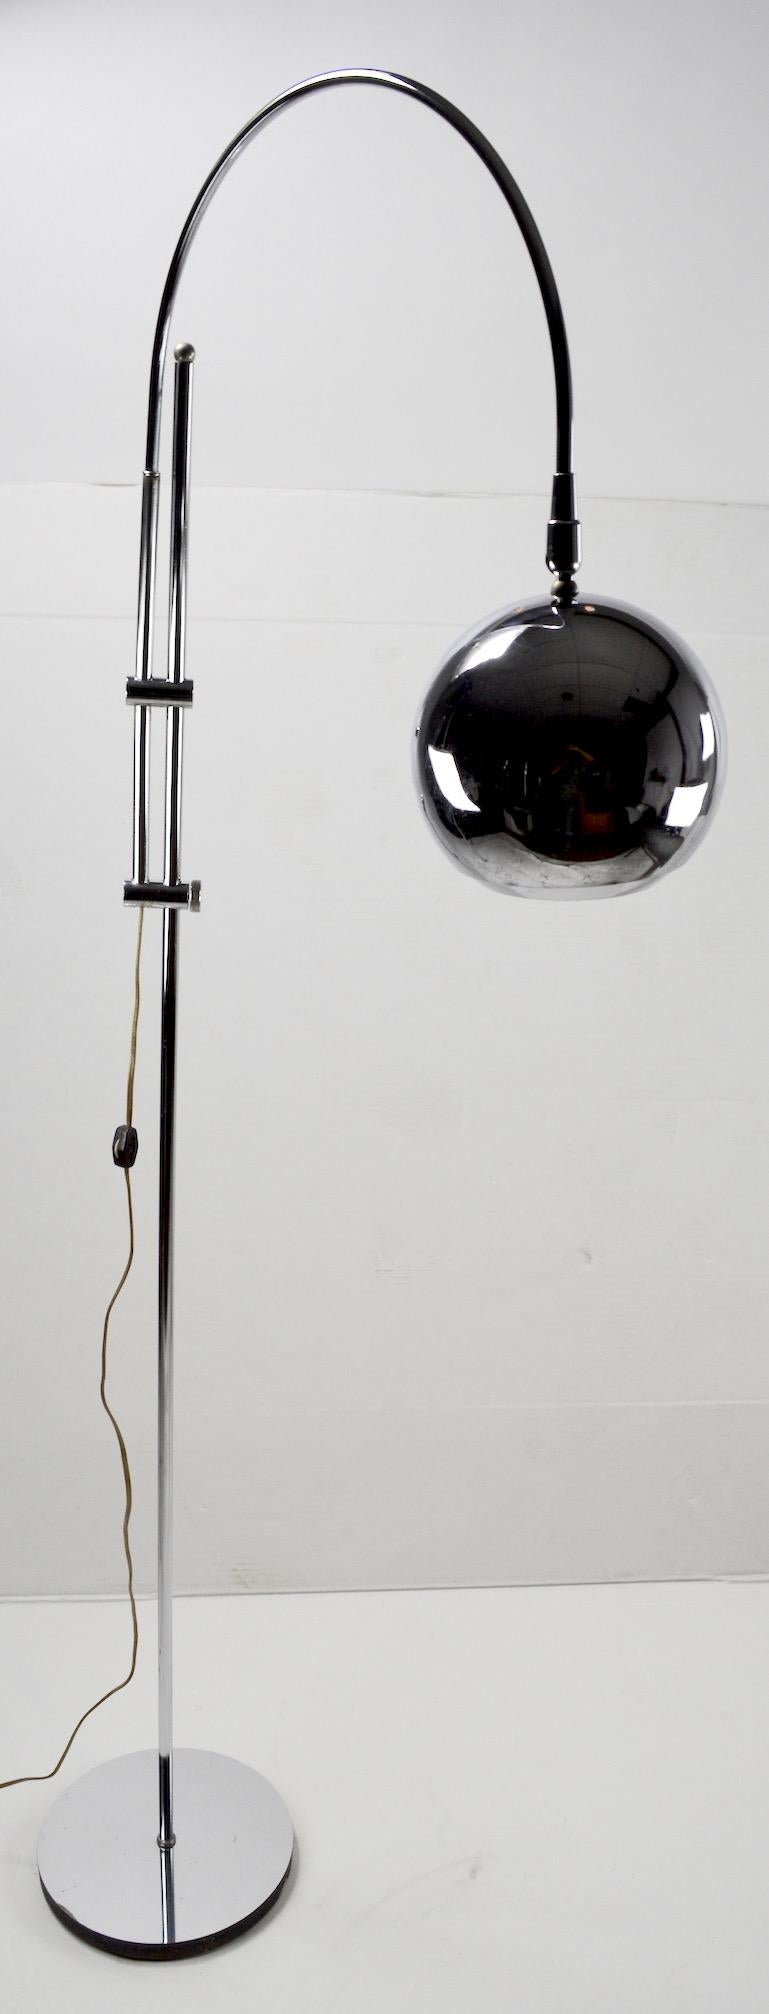 Nice quality adjustable chrome floor lamp. This floor lamp can be raised, lowered, the arc arm swivels, and the ball shade pivots , allowing for infinite adjustments to position the light exactly where you want it. Lamp accepts a standard screw in